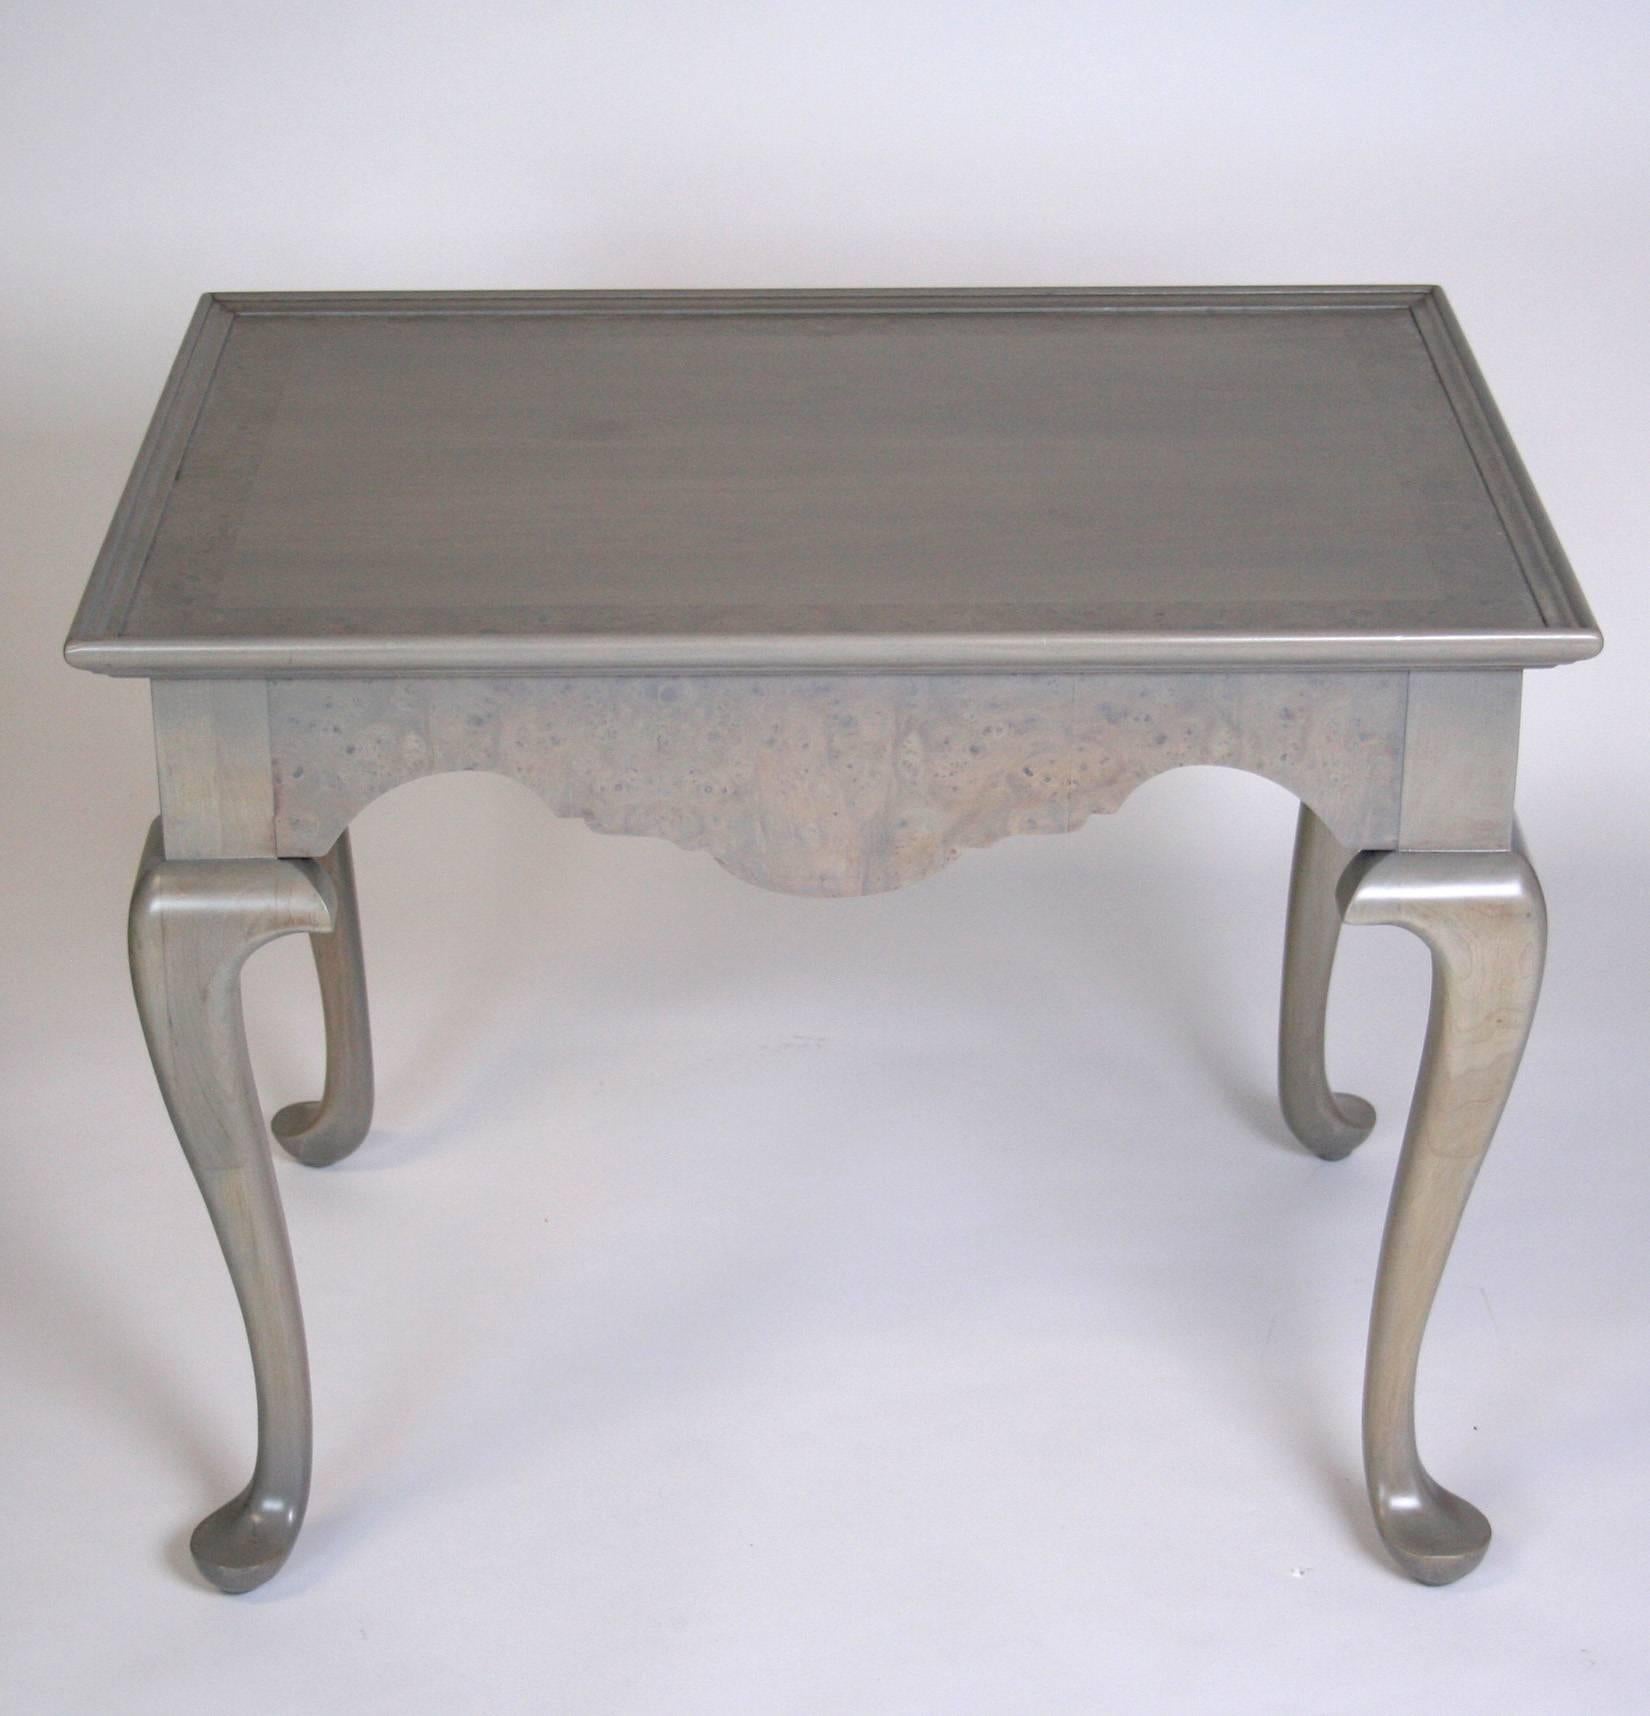 A pair of end tables in the Queen Anne style by Fine Arts Furniture. Scalloped apron has burl veneer, while the try style top has a border of burl. Refinished in a sliver grey stain.